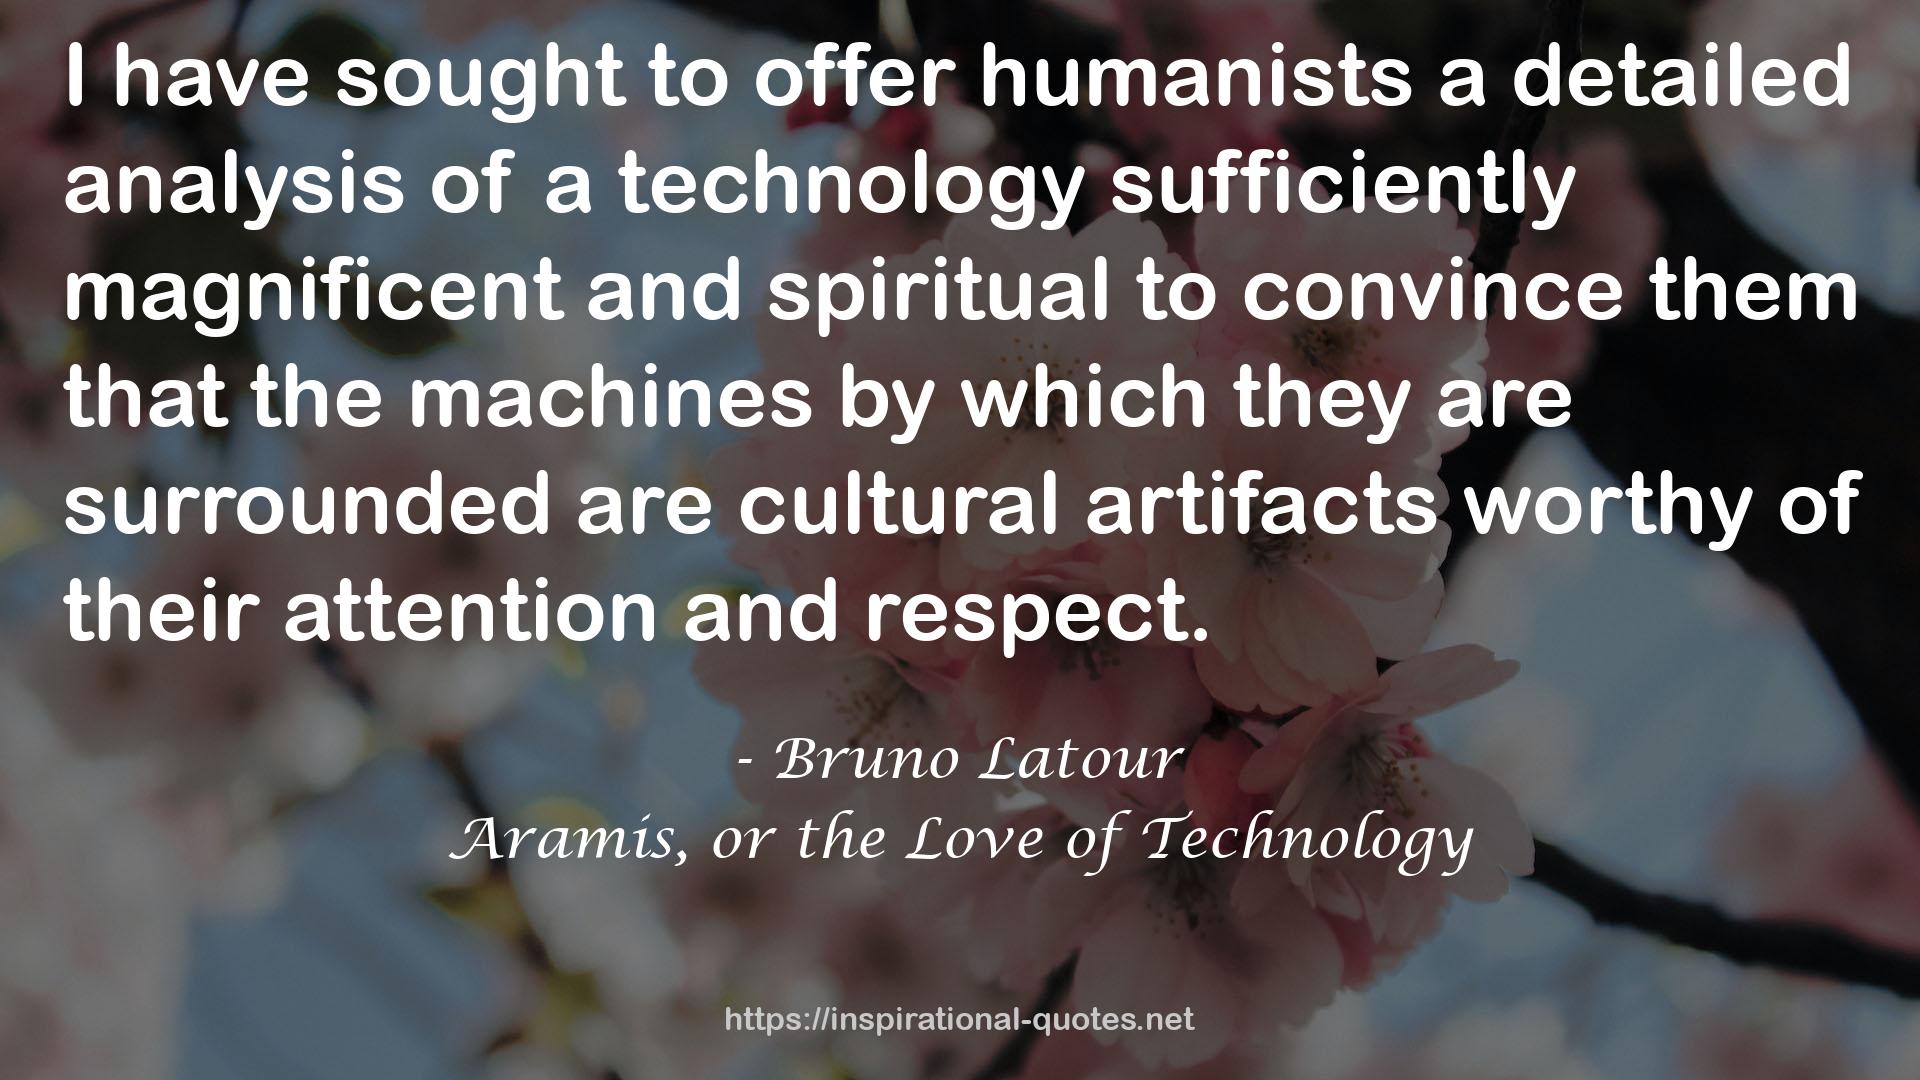 Aramis, or the Love of Technology QUOTES